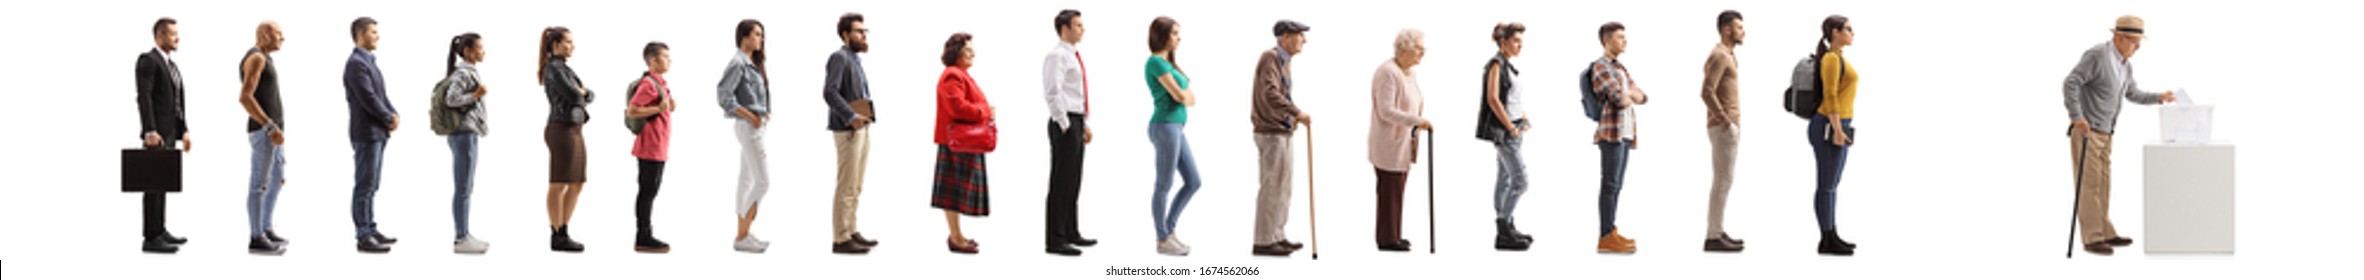 Full Length Profile Shot Of People Waiting In Line To Vote At Election Isolated On White Background